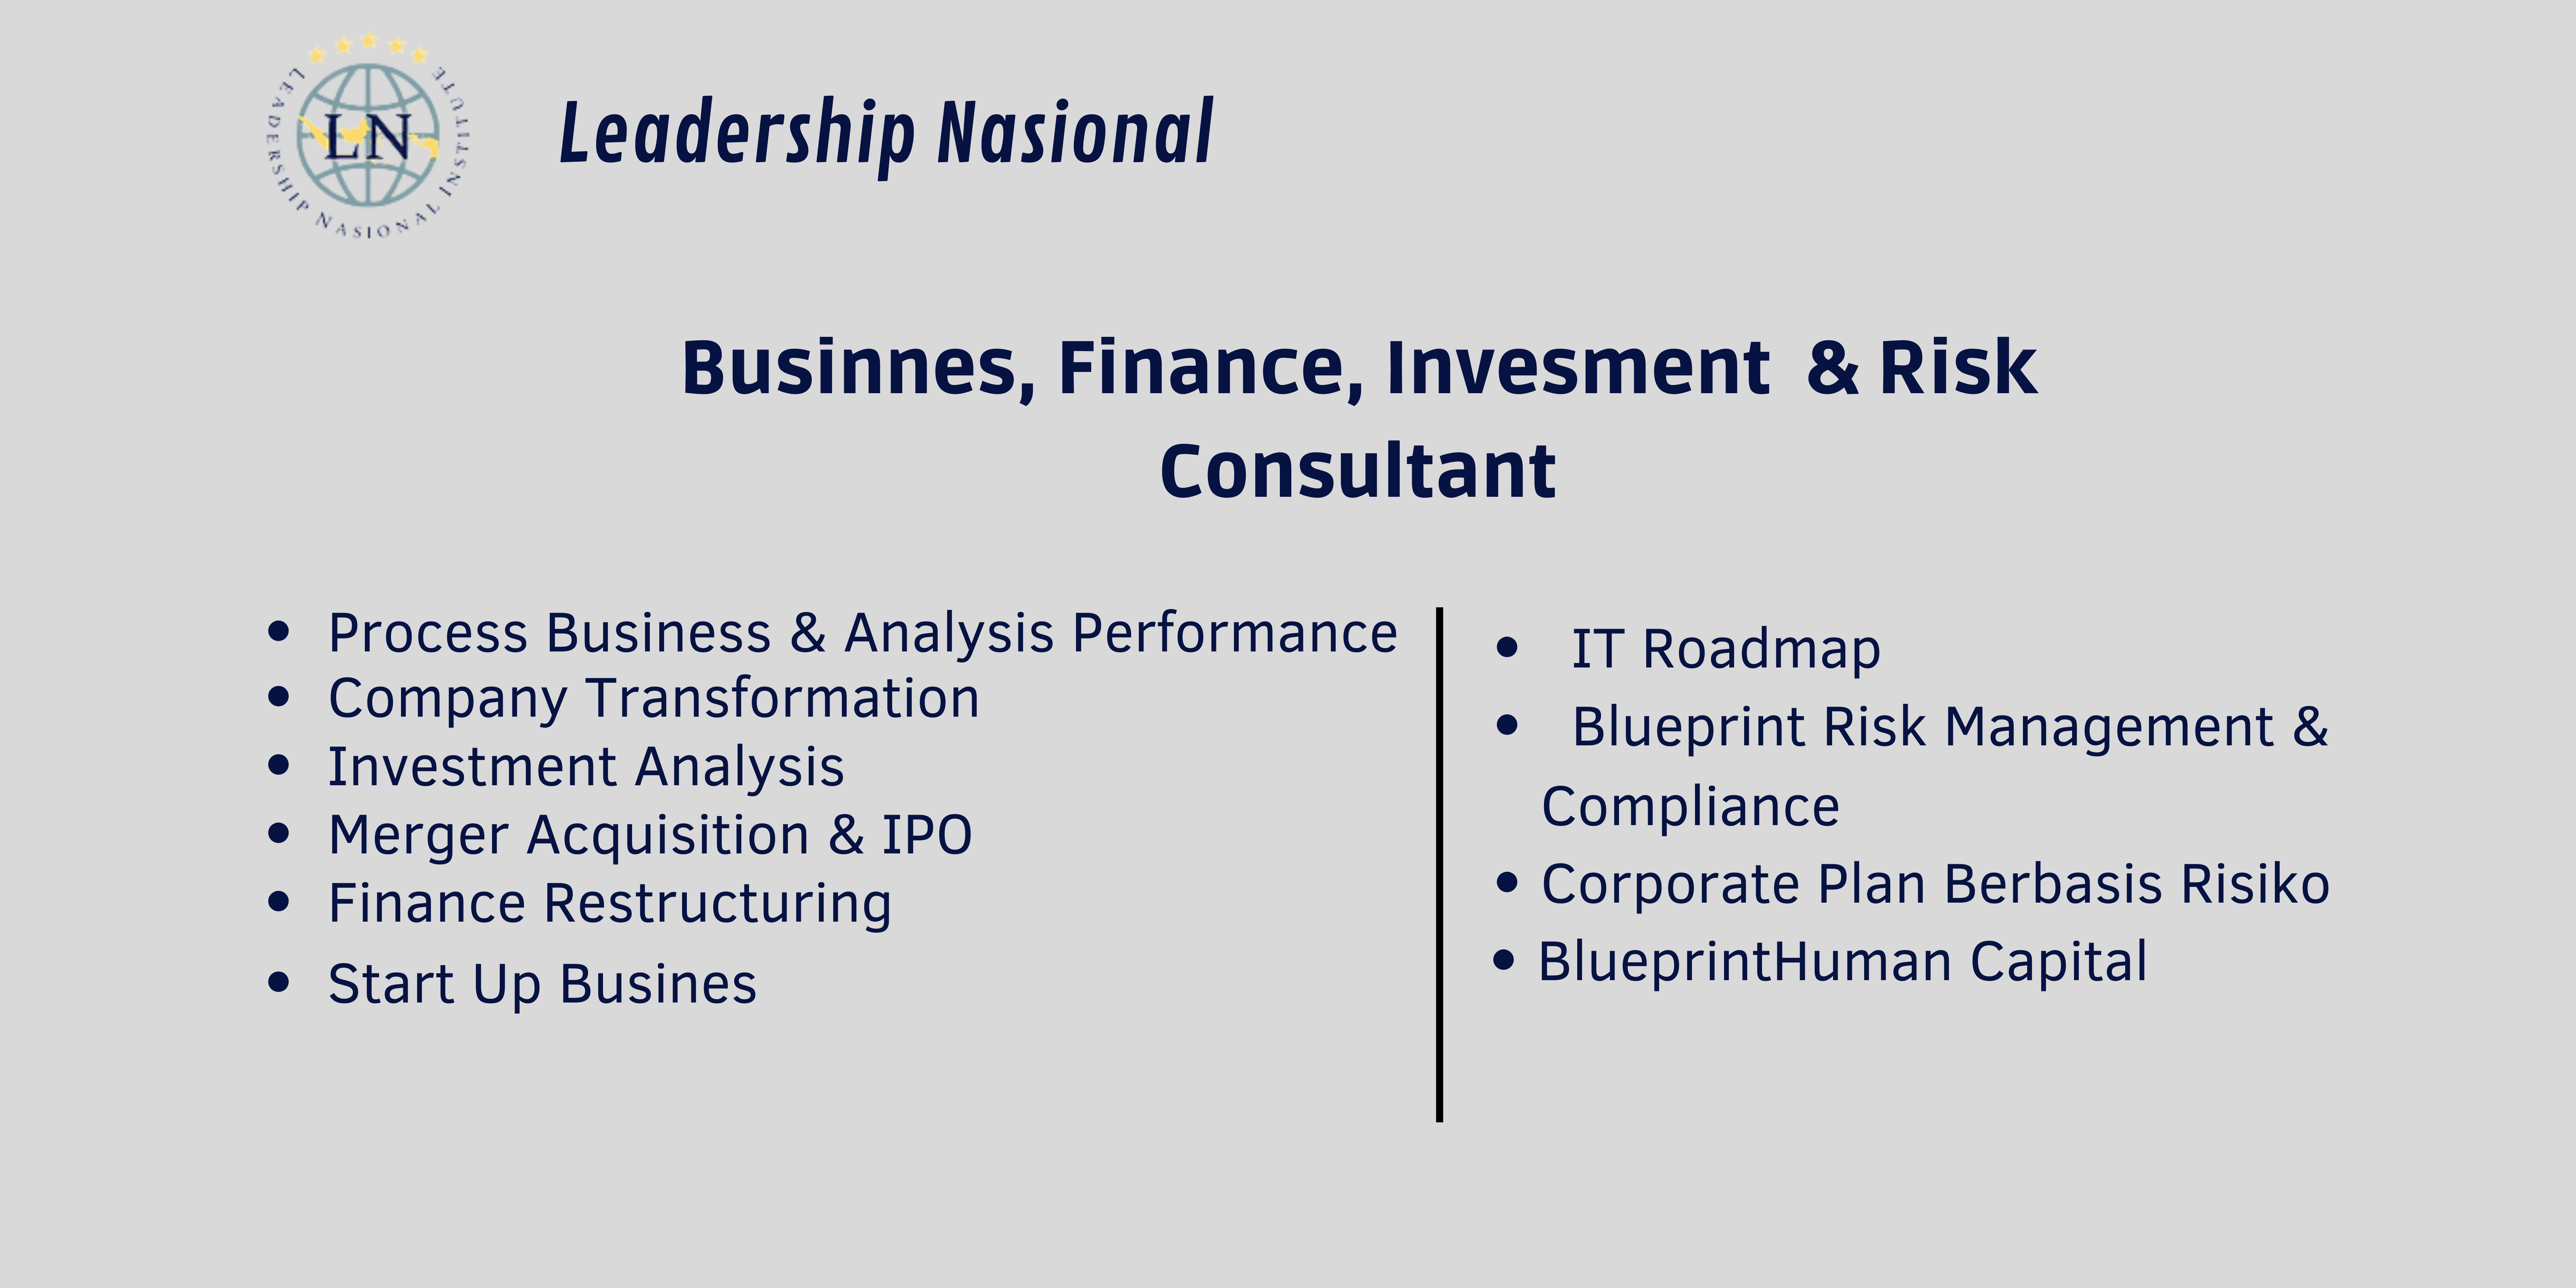 BUSINESS, FINANCE, INVESTMENT, & RISK CONSULTANT